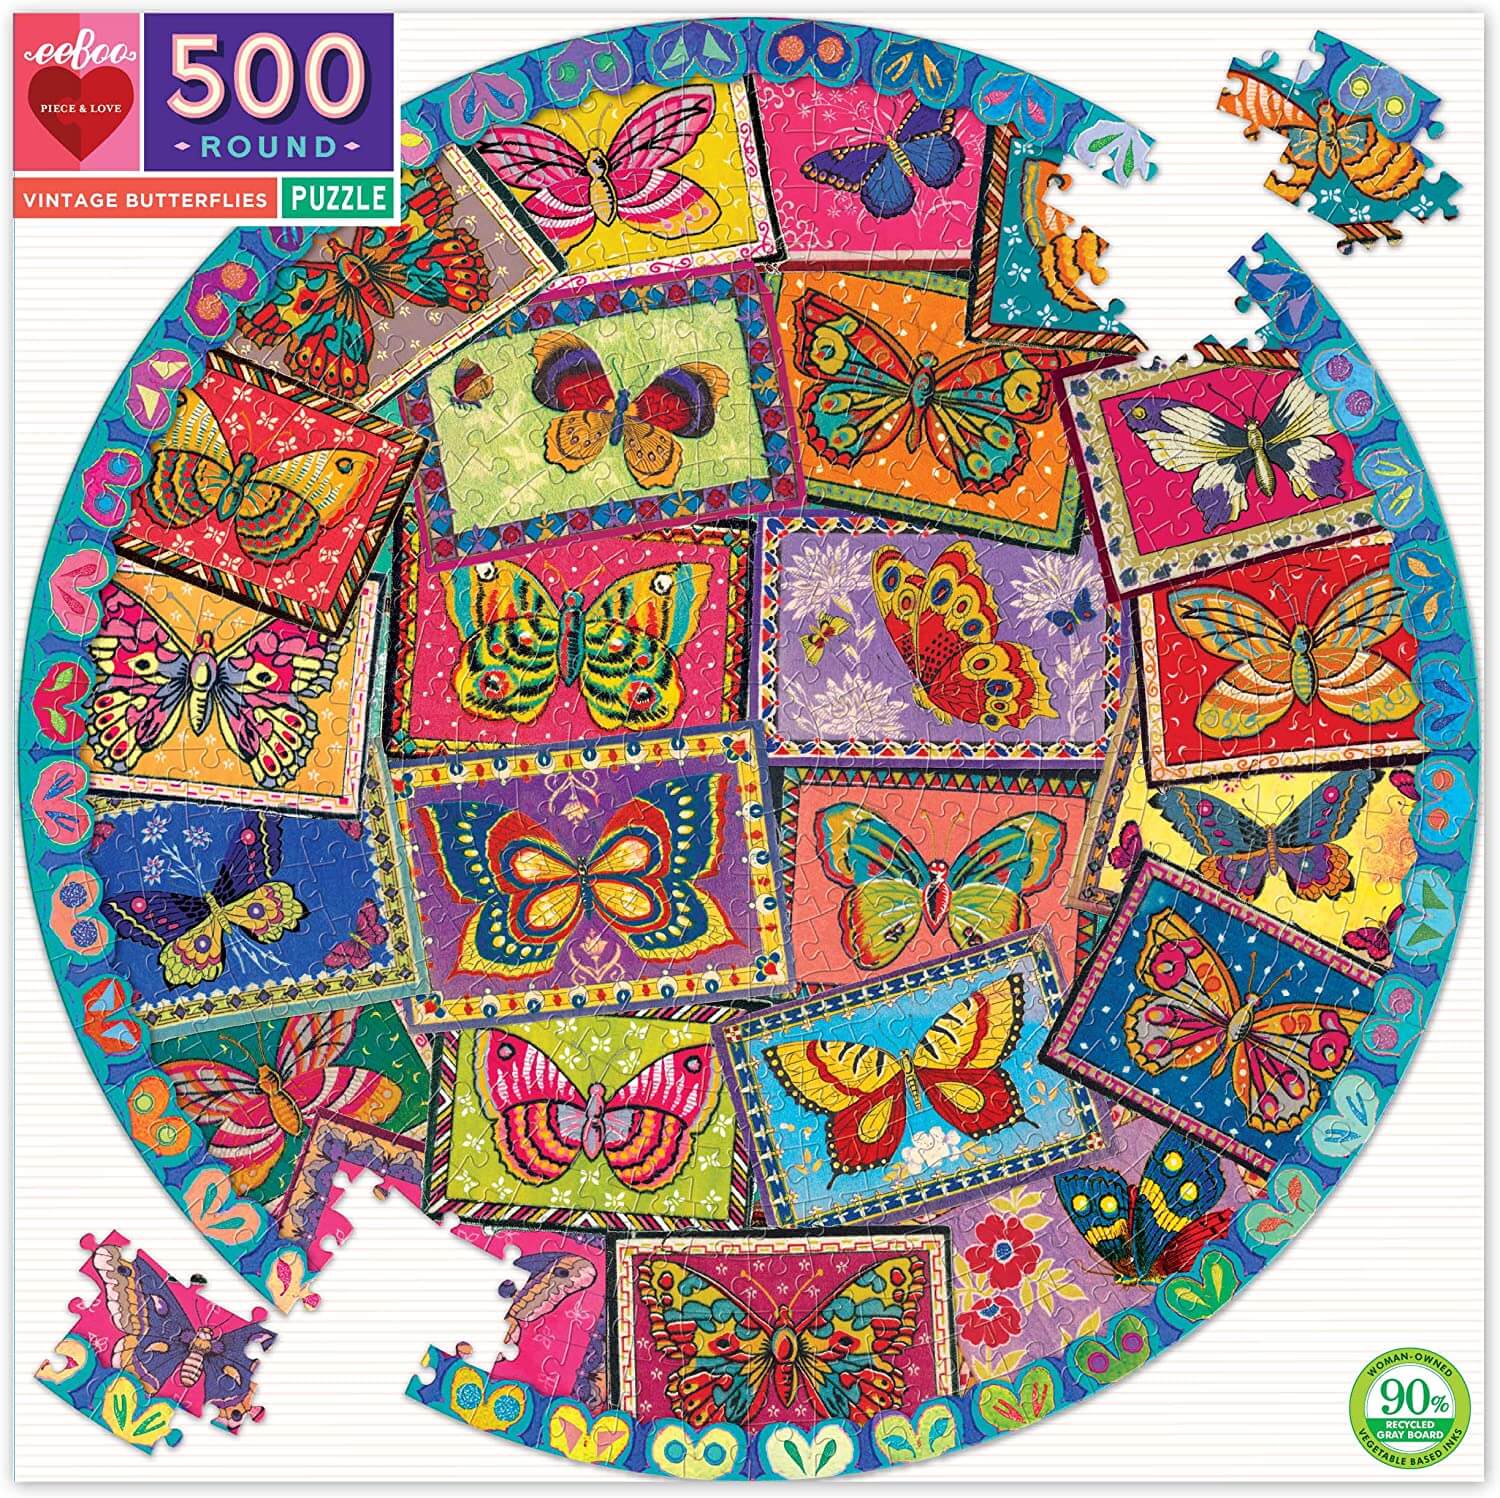 eeBoo - Piece and Love Vintage Butterflies 500 Piece Round Circle Jigsaw Puzzle